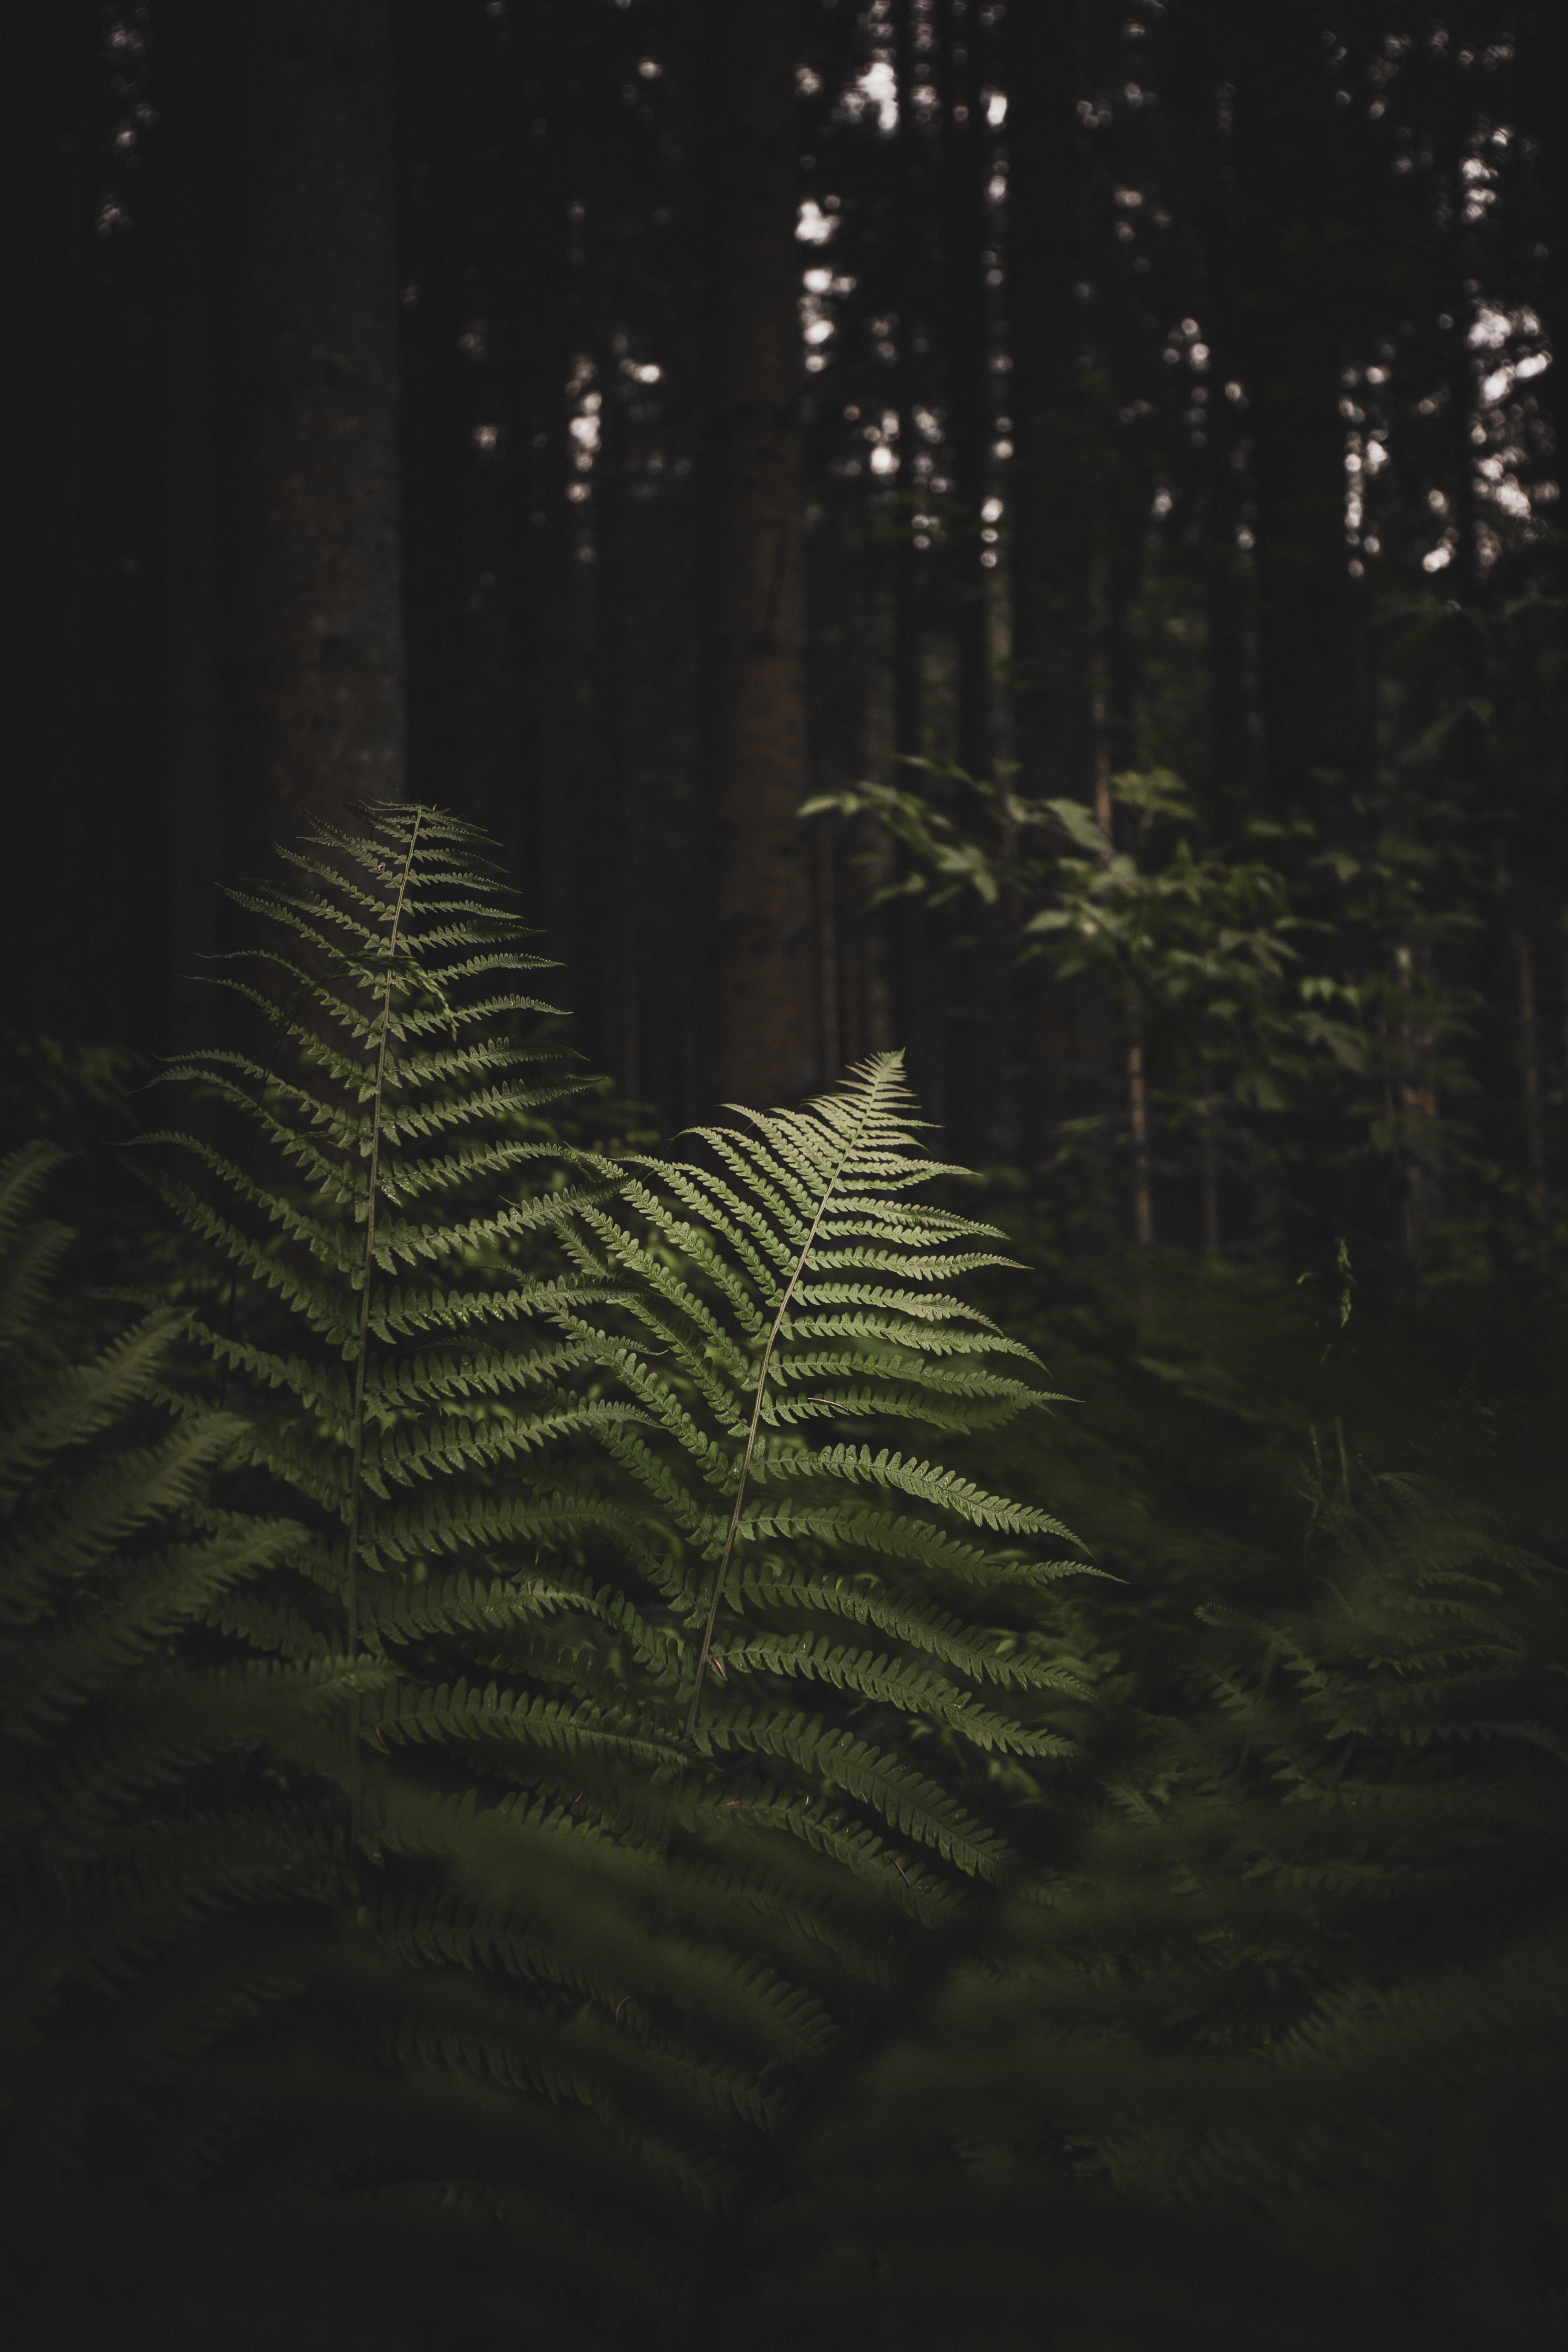 fern, nature, trees, forest, branches